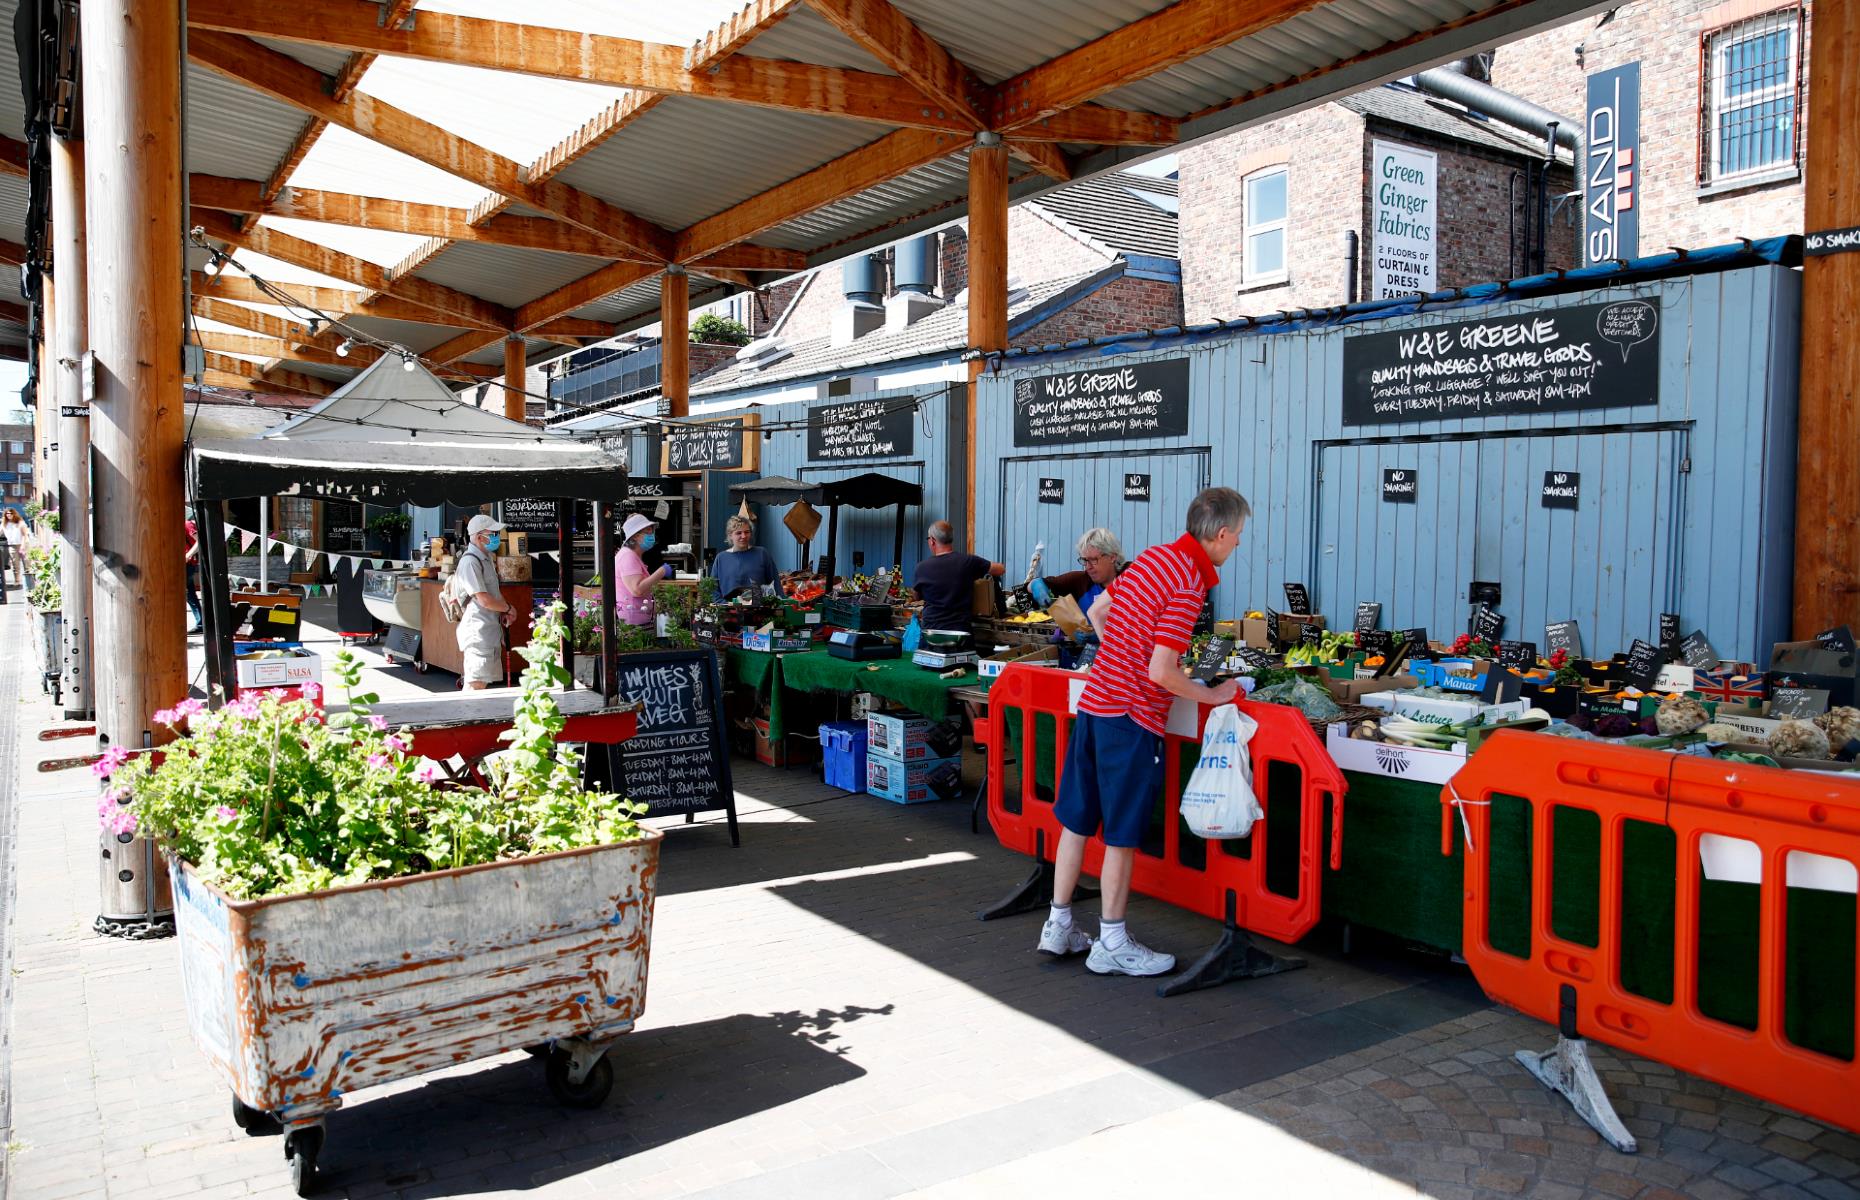 Altrincham, England: Markets with a difference